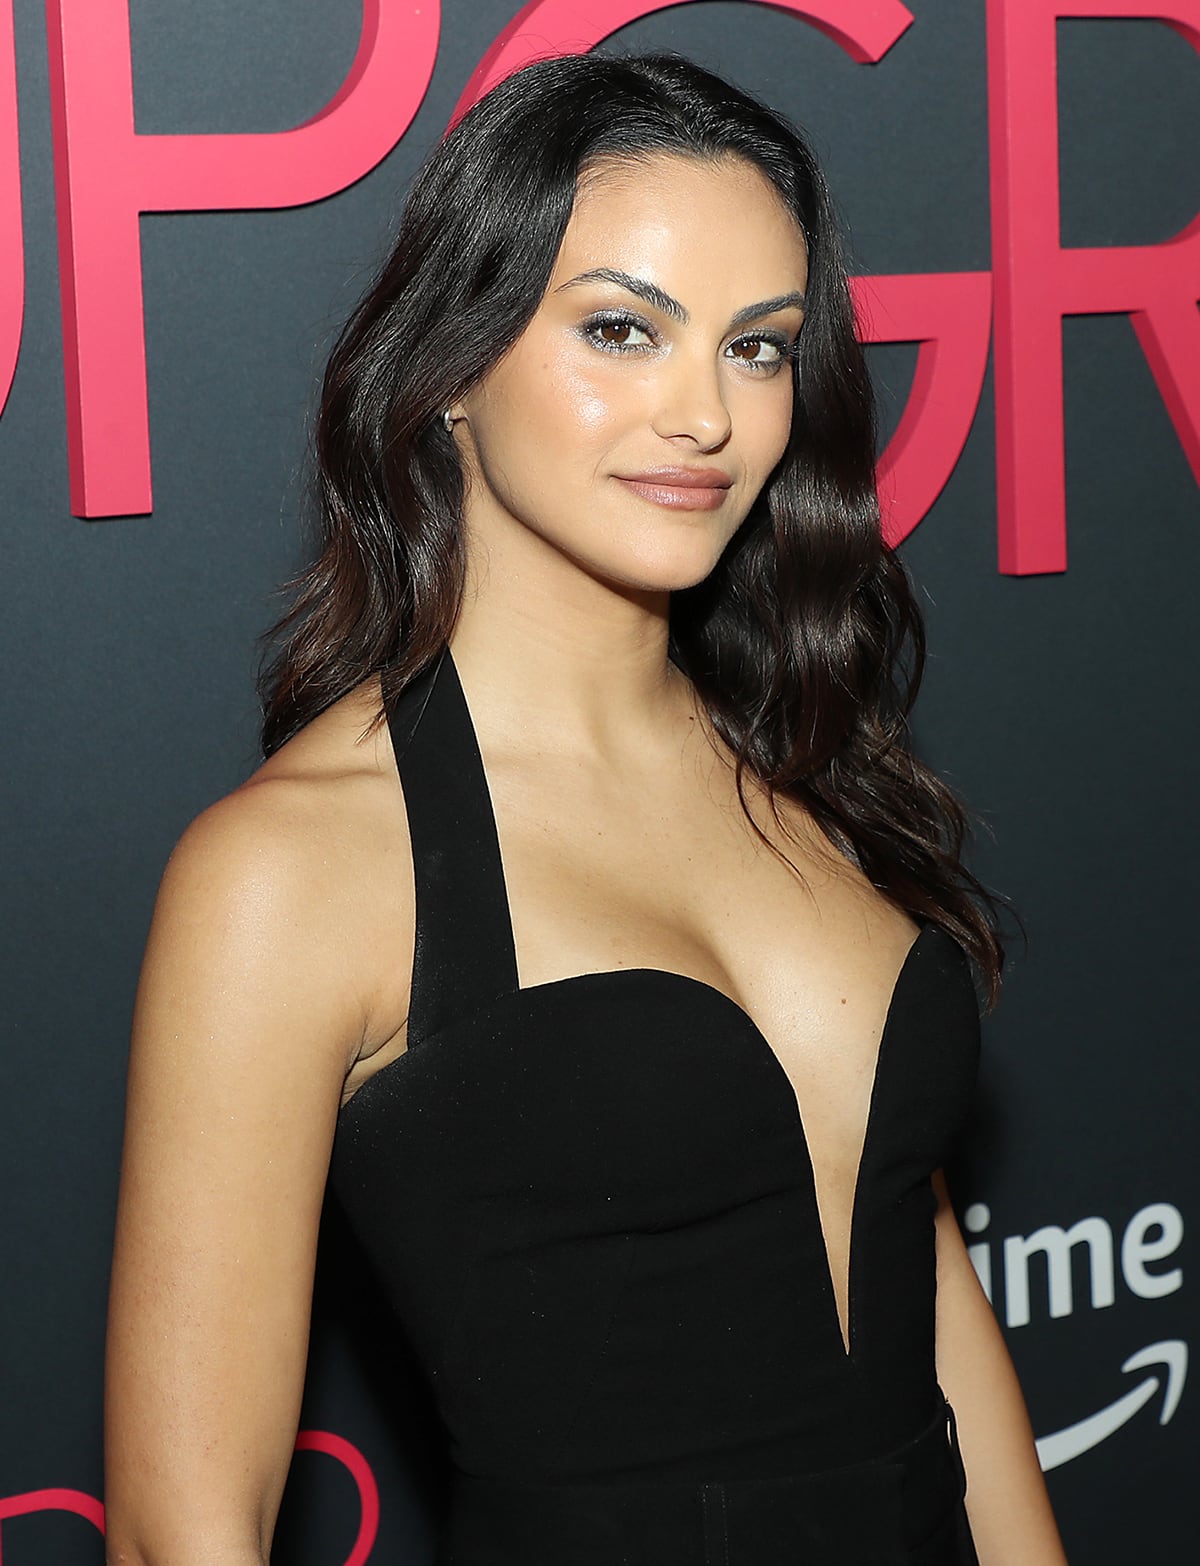 Camila Mendes styles her tresses in curls and wears metallic smoke makeup with nude lipstick